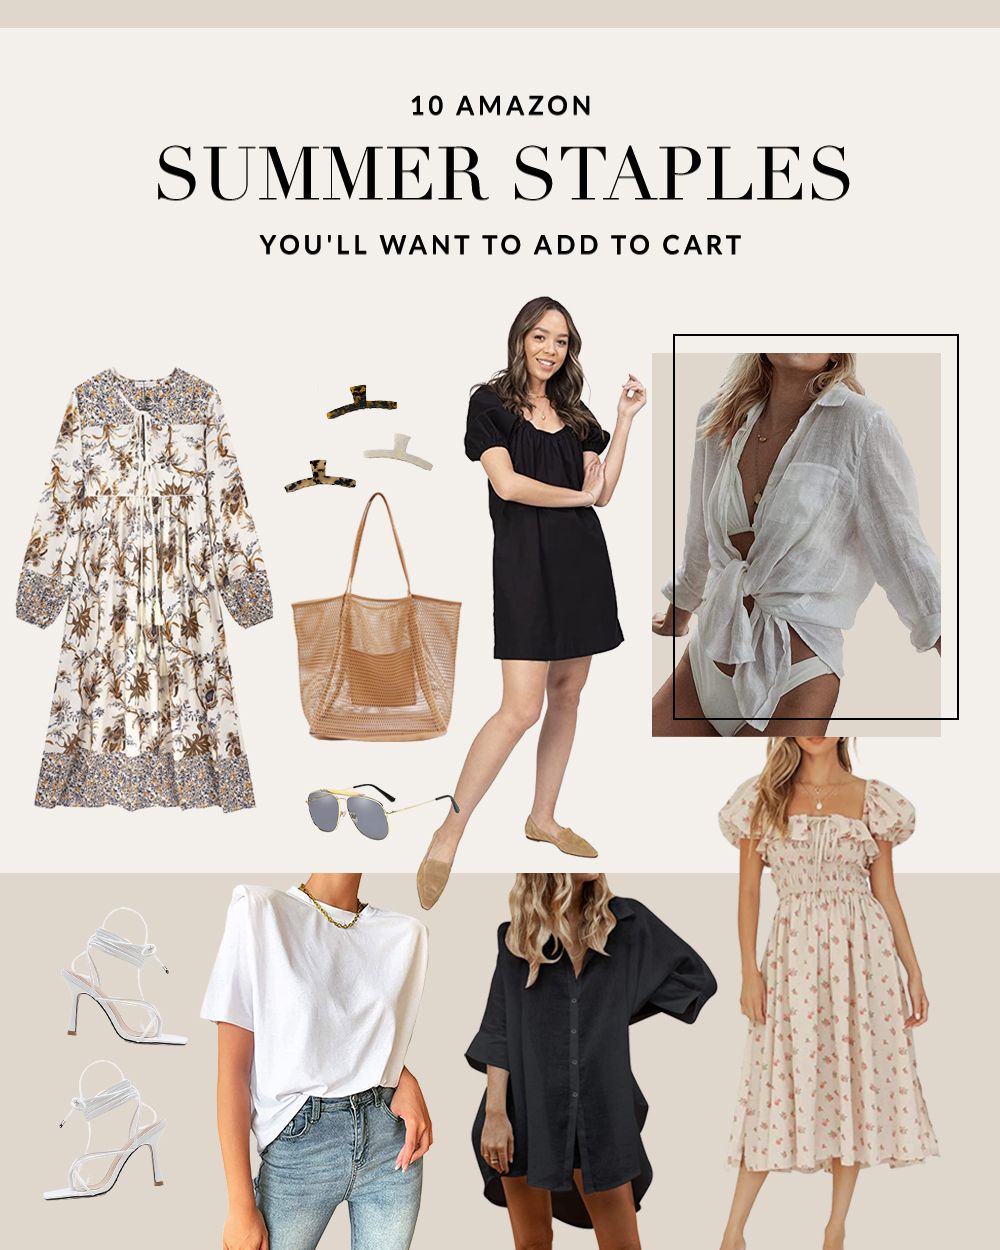 10 Amazon Summer Staples You’ll Want To Add to Cart